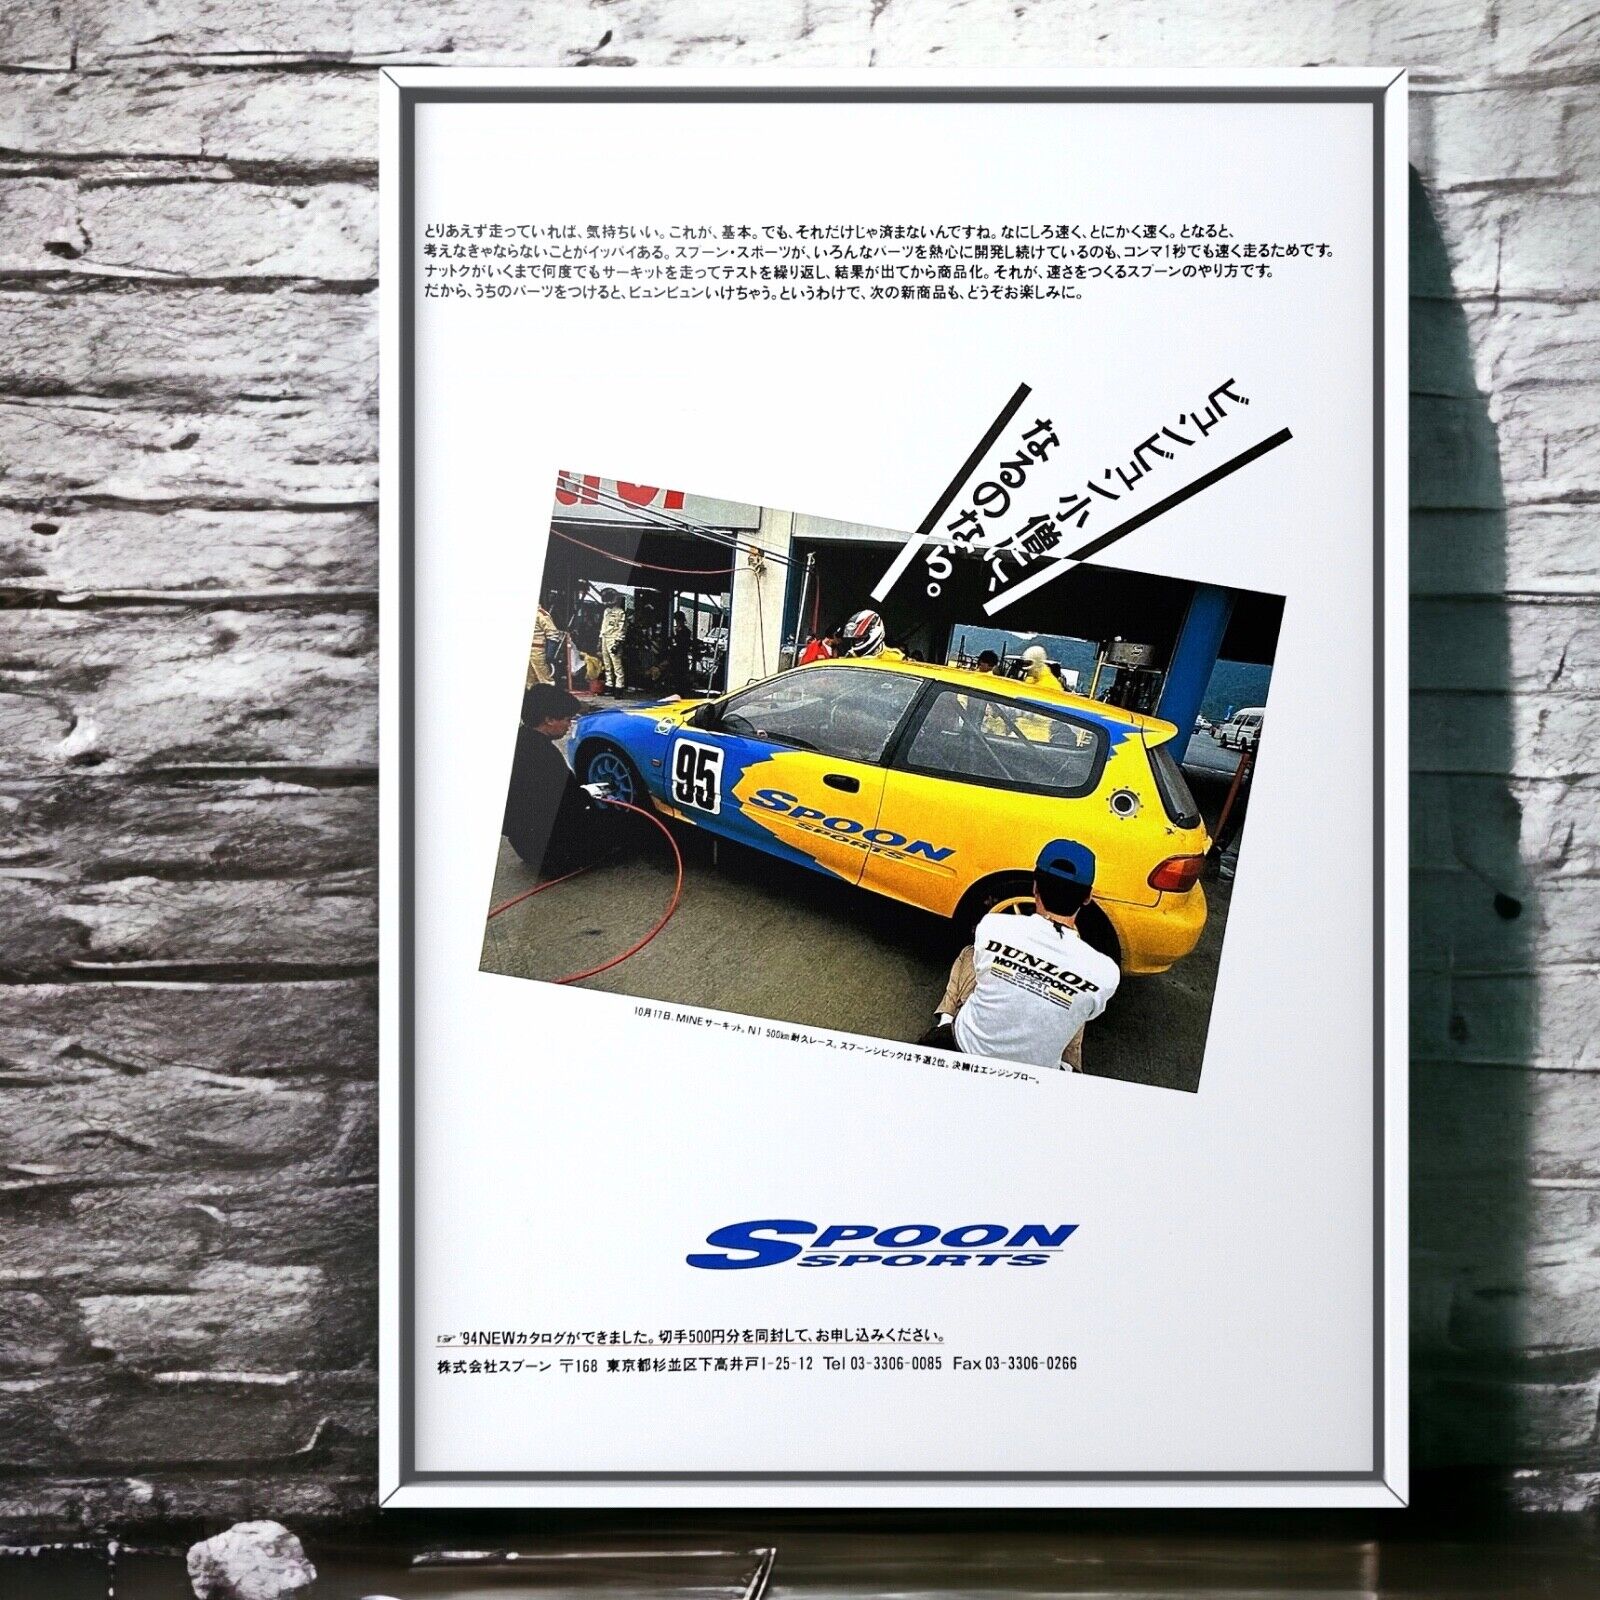 Authentic Official Vintage SpoonSports Civic EG Mk5 race car Ad Poster B16B B16A